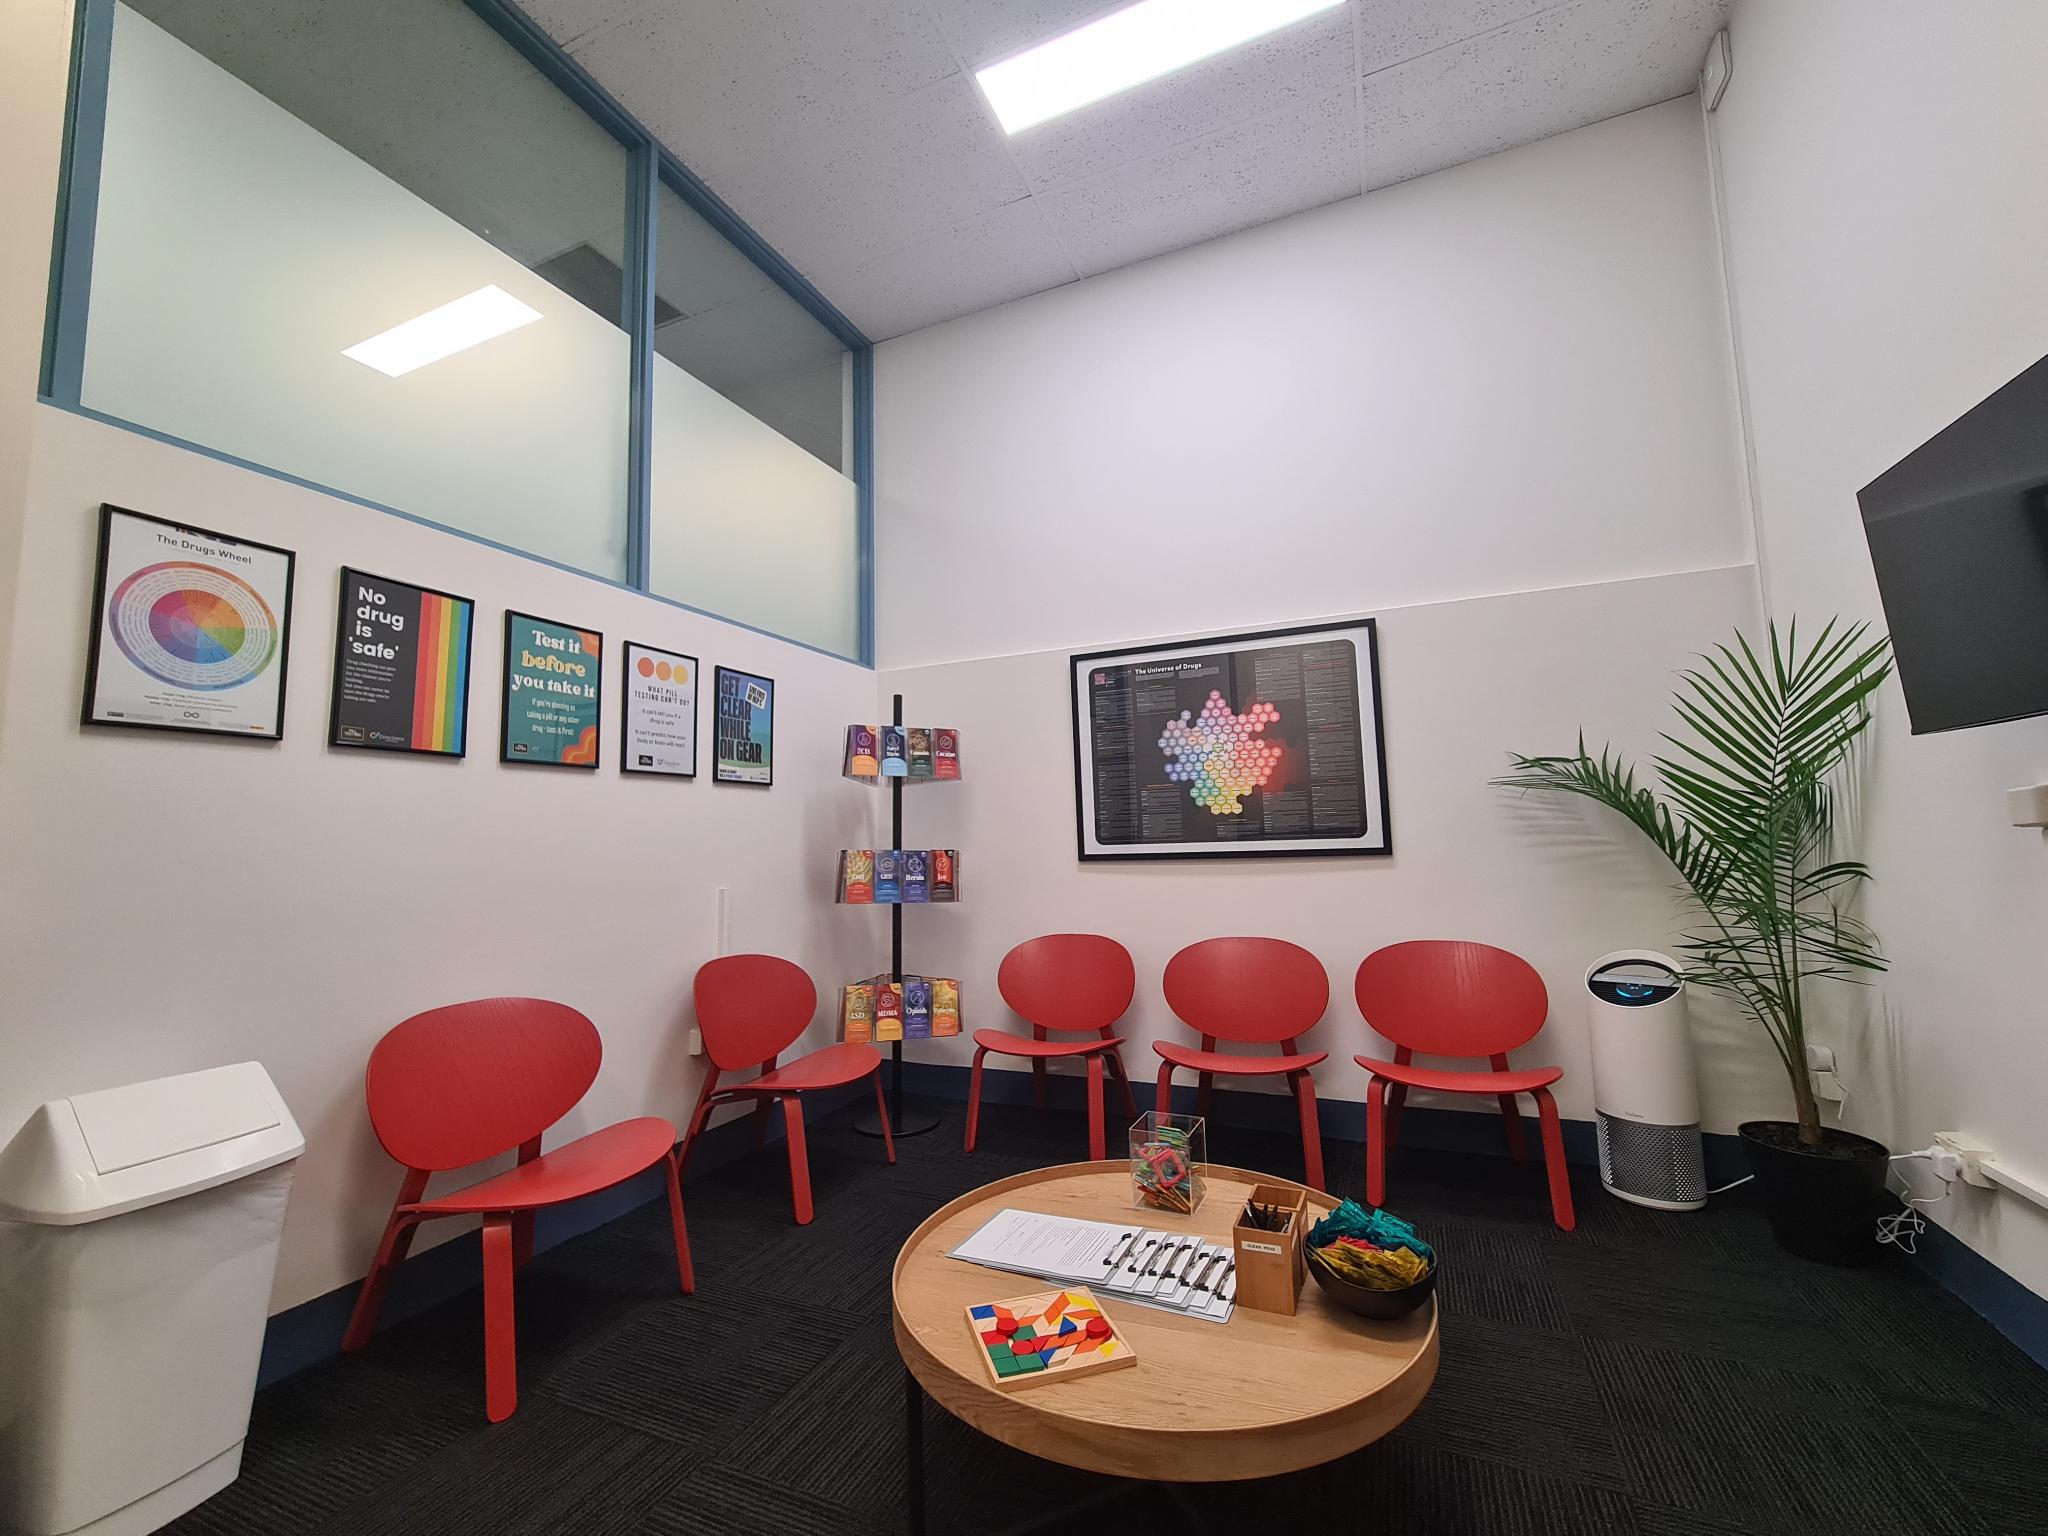 A photograph of the CanTEST Health and Drug Checking service waiting room. The room has red chairs lining the wall, a low table, and posters on the wall with health and harm minimisation information about drugs.